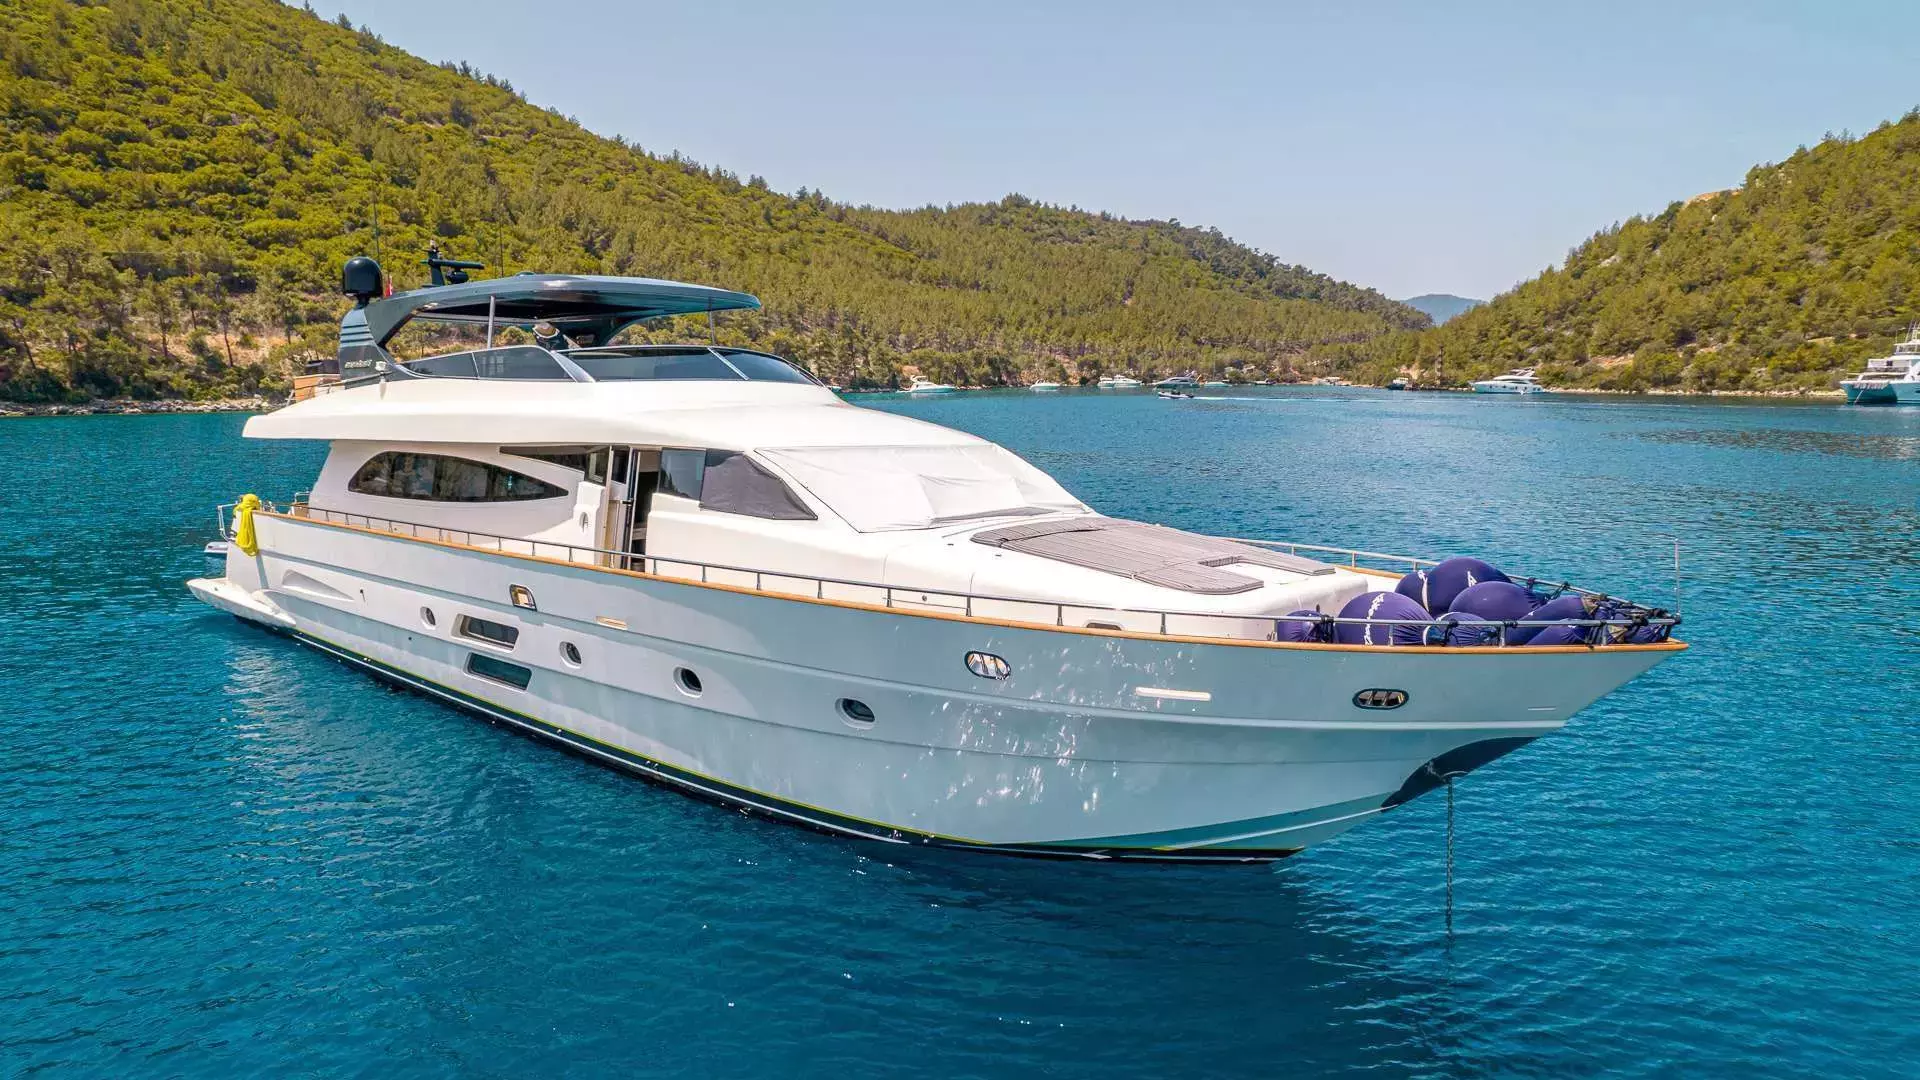 Liberata by Canados - Top rates for a Charter of a private Motor Yacht in Cyprus